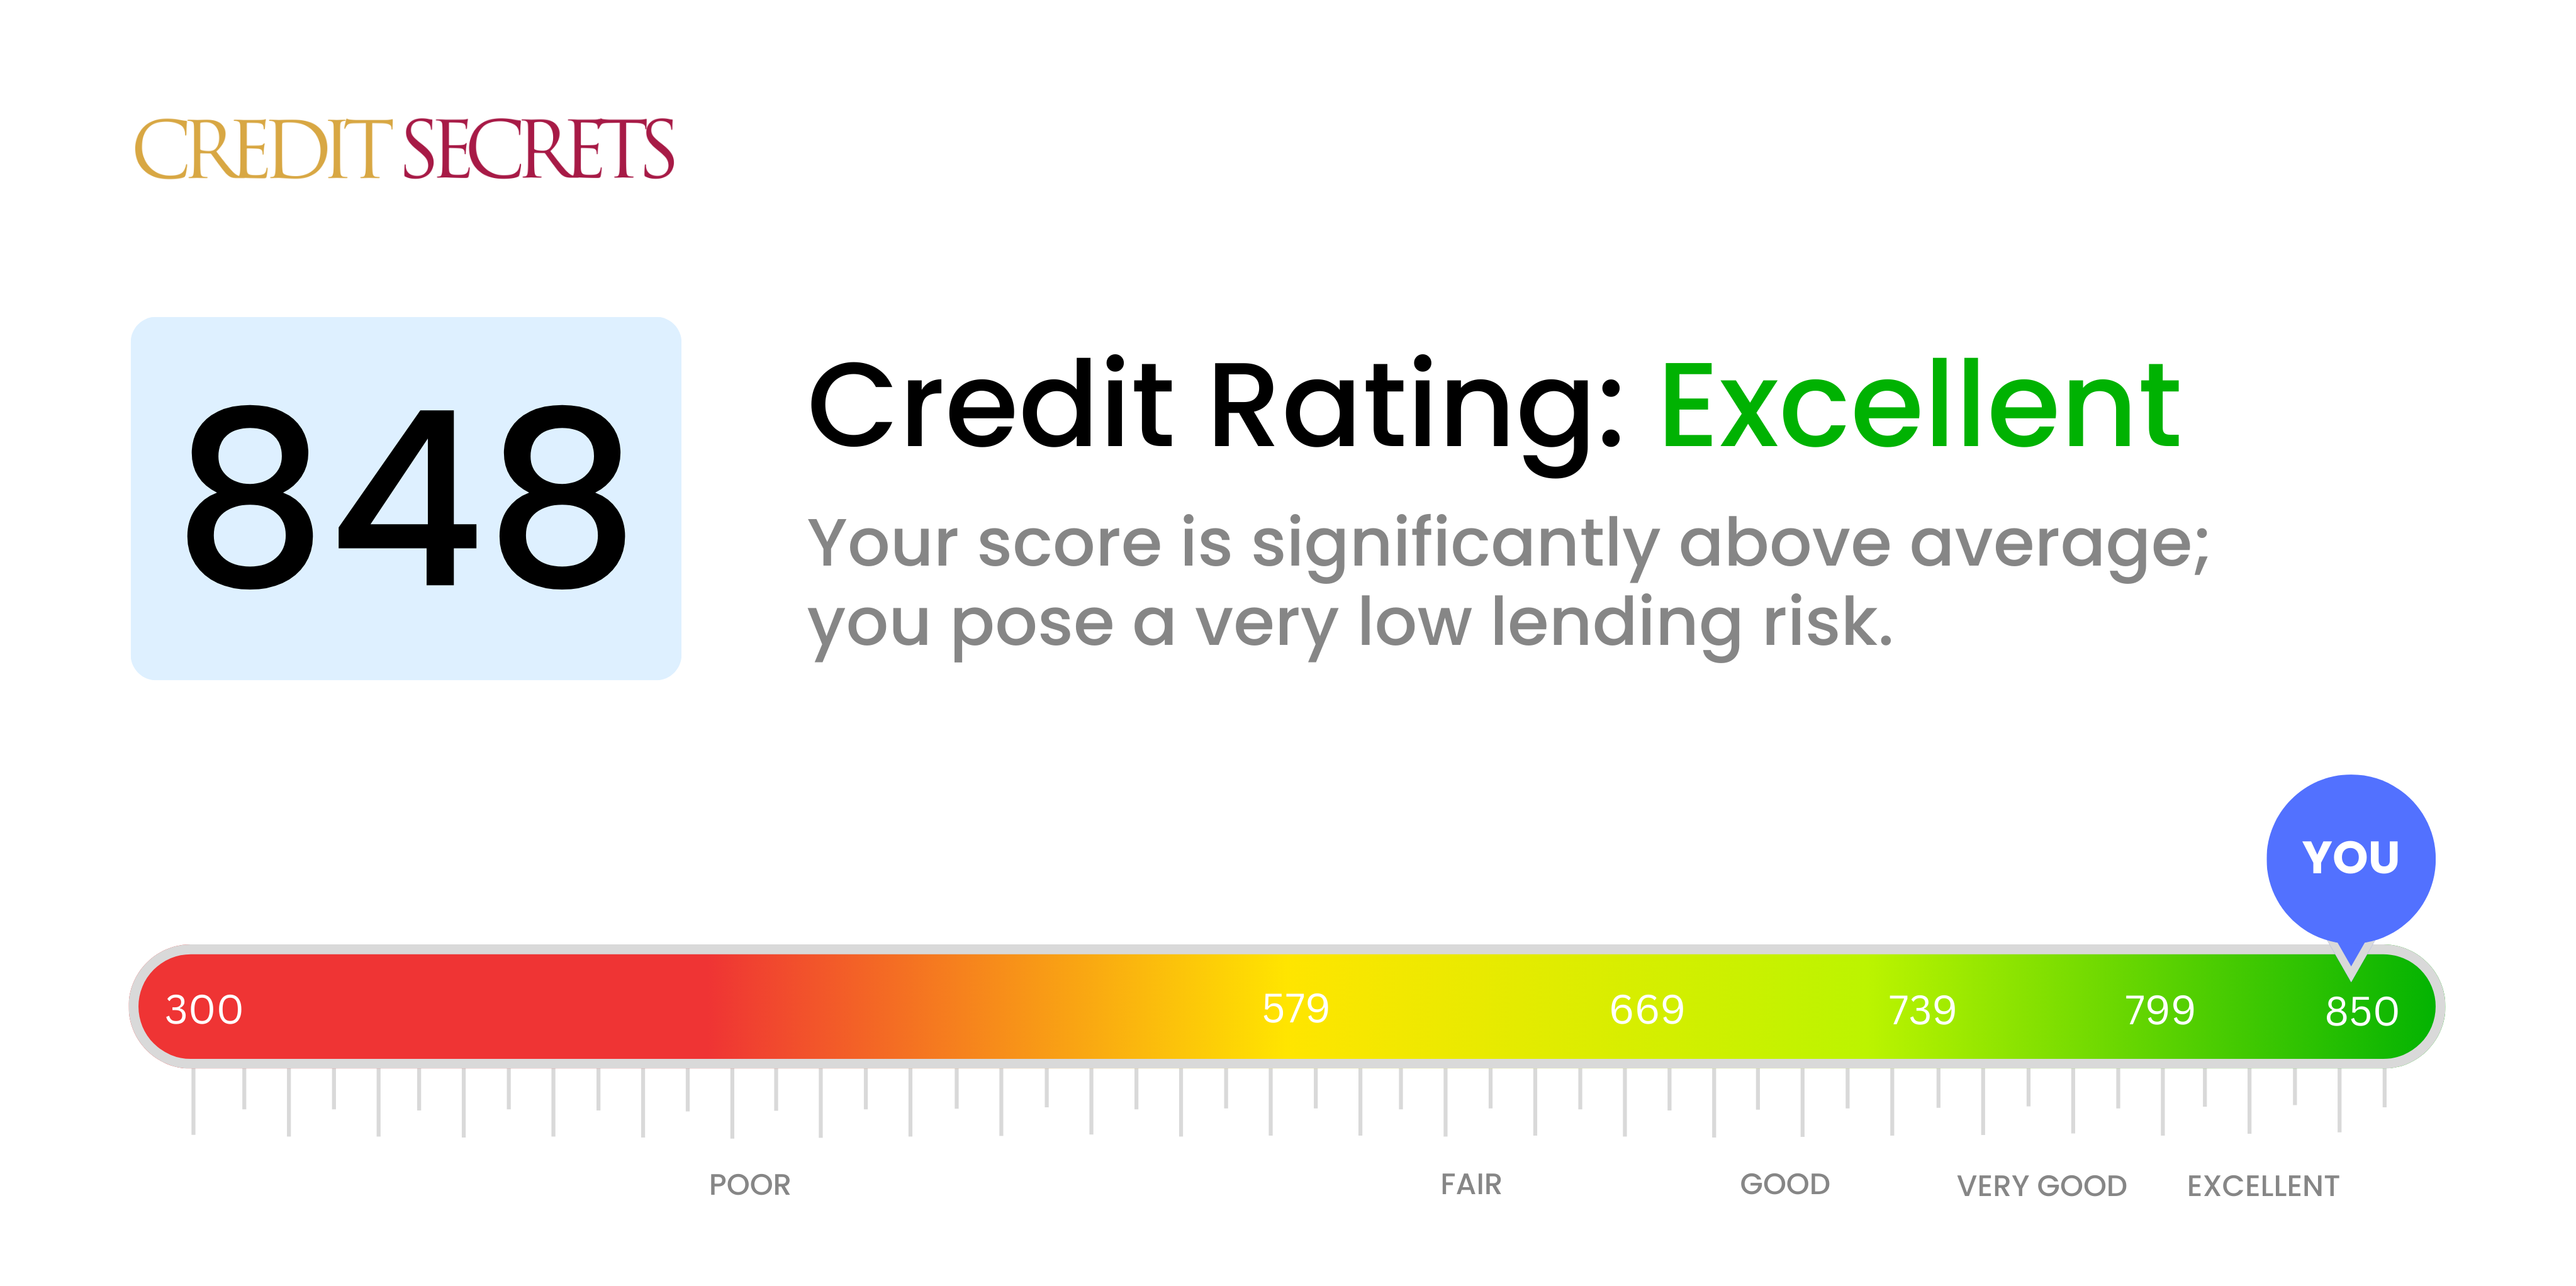 Is 848 a good credit score?